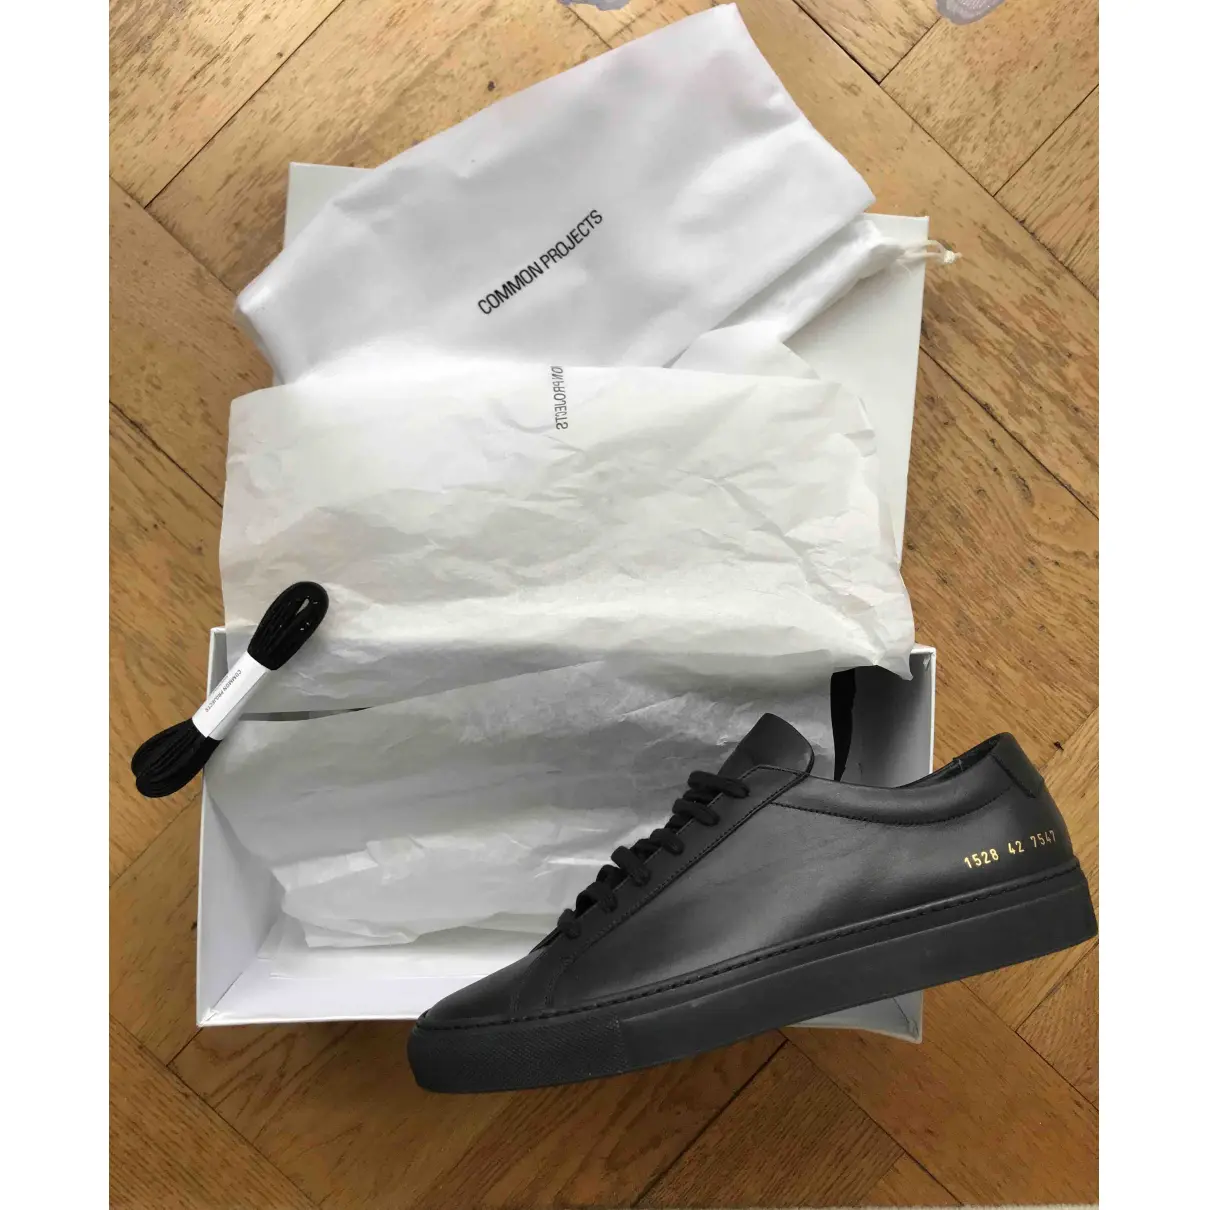 Buy Common Projects Leather low trainers online